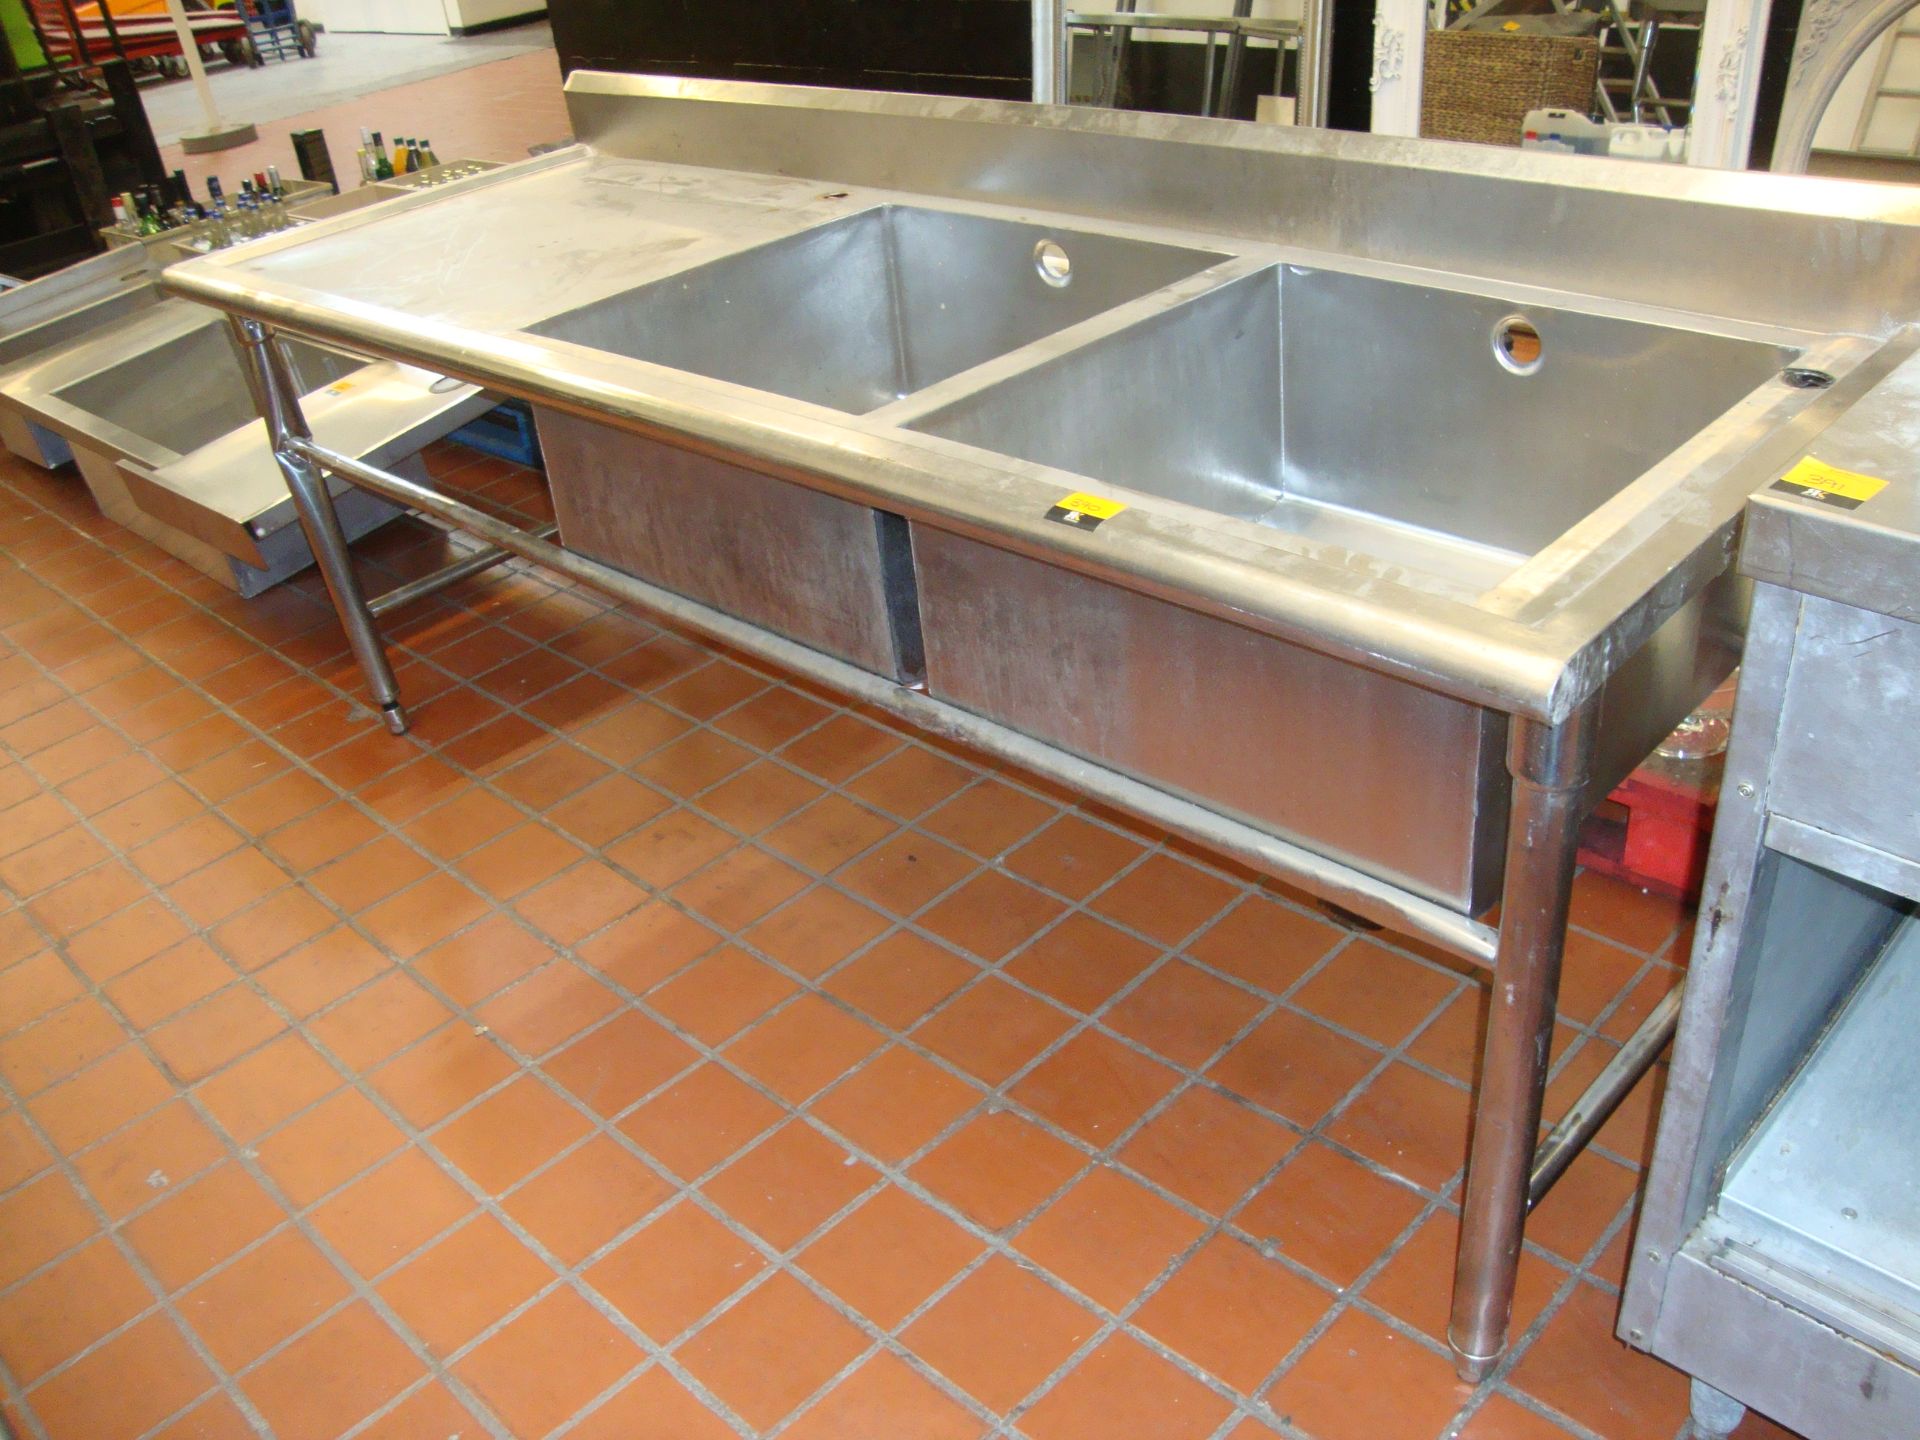 Large freestanding stainless steel twin bowl sink with max dimensions circa 87" x 31.5" x 37" - Image 3 of 3